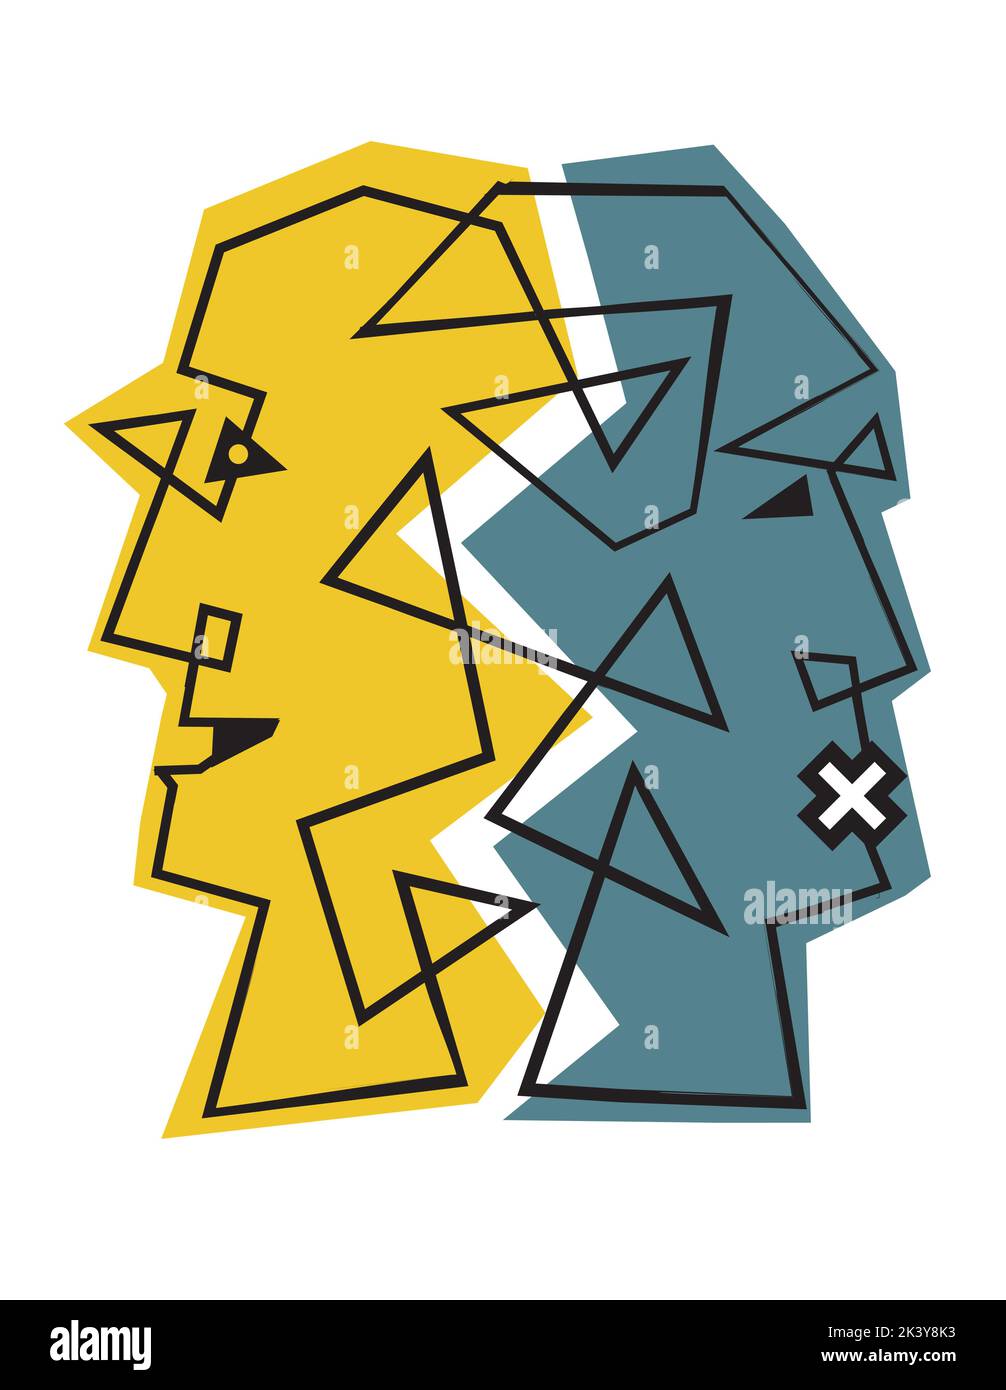 Schizophrenia, depression, bipolar disorder, male heads, lineart.   Illustration of connected Male heads. Concept symbolizing mental illness. Stock Vector